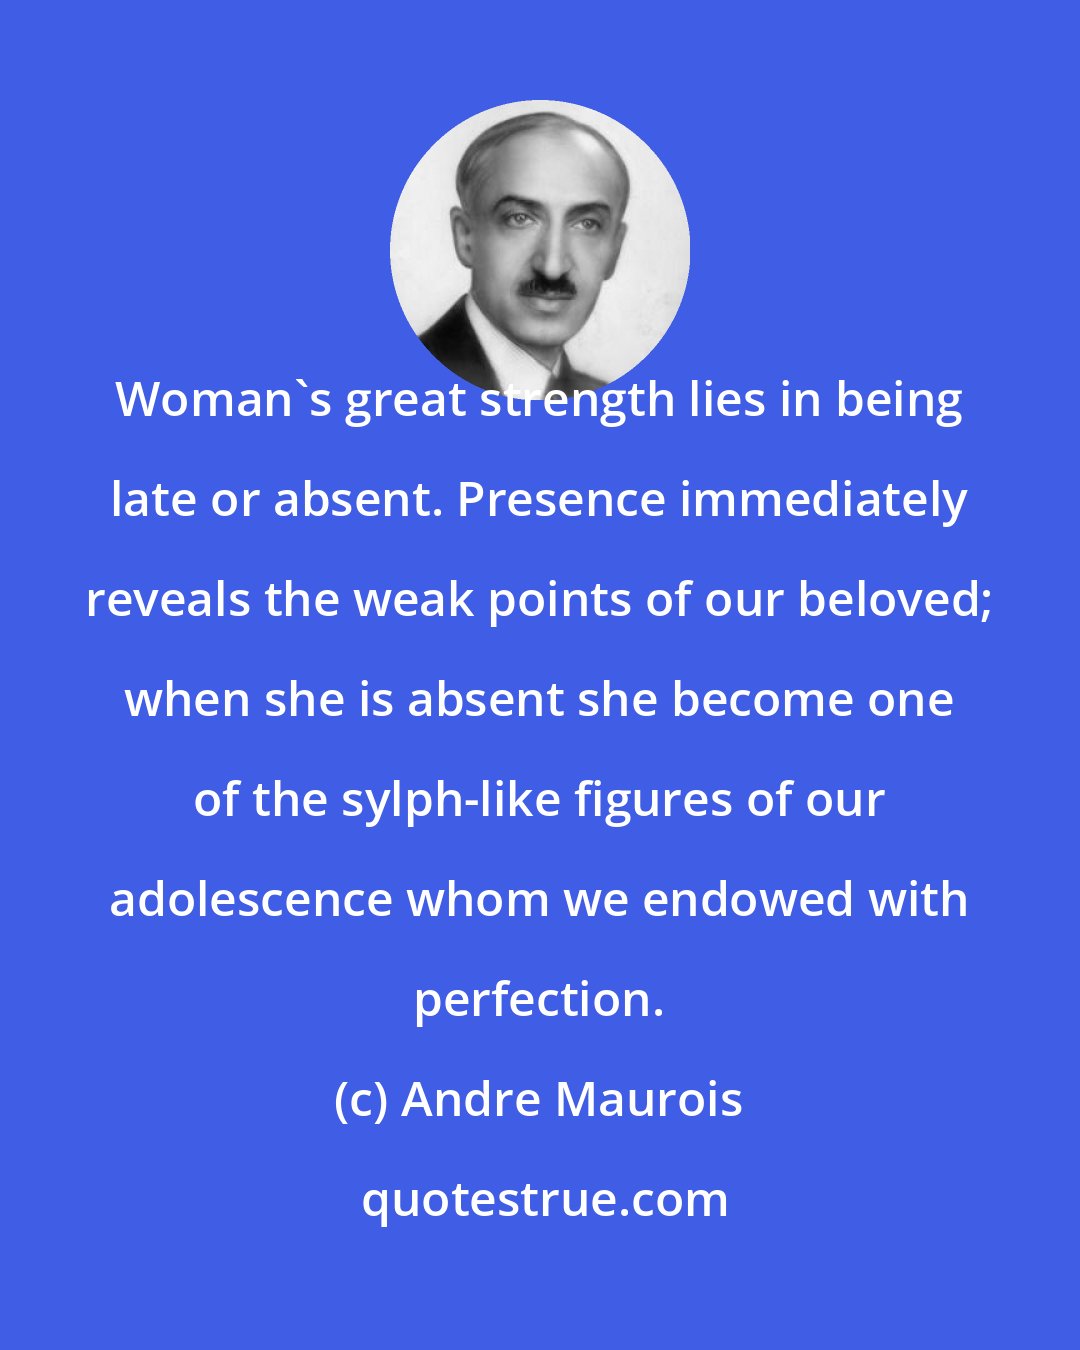 Andre Maurois: Woman's great strength lies in being late or absent. Presence immediately reveals the weak points of our beloved; when she is absent she become one of the sylph-like figures of our adolescence whom we endowed with perfection.